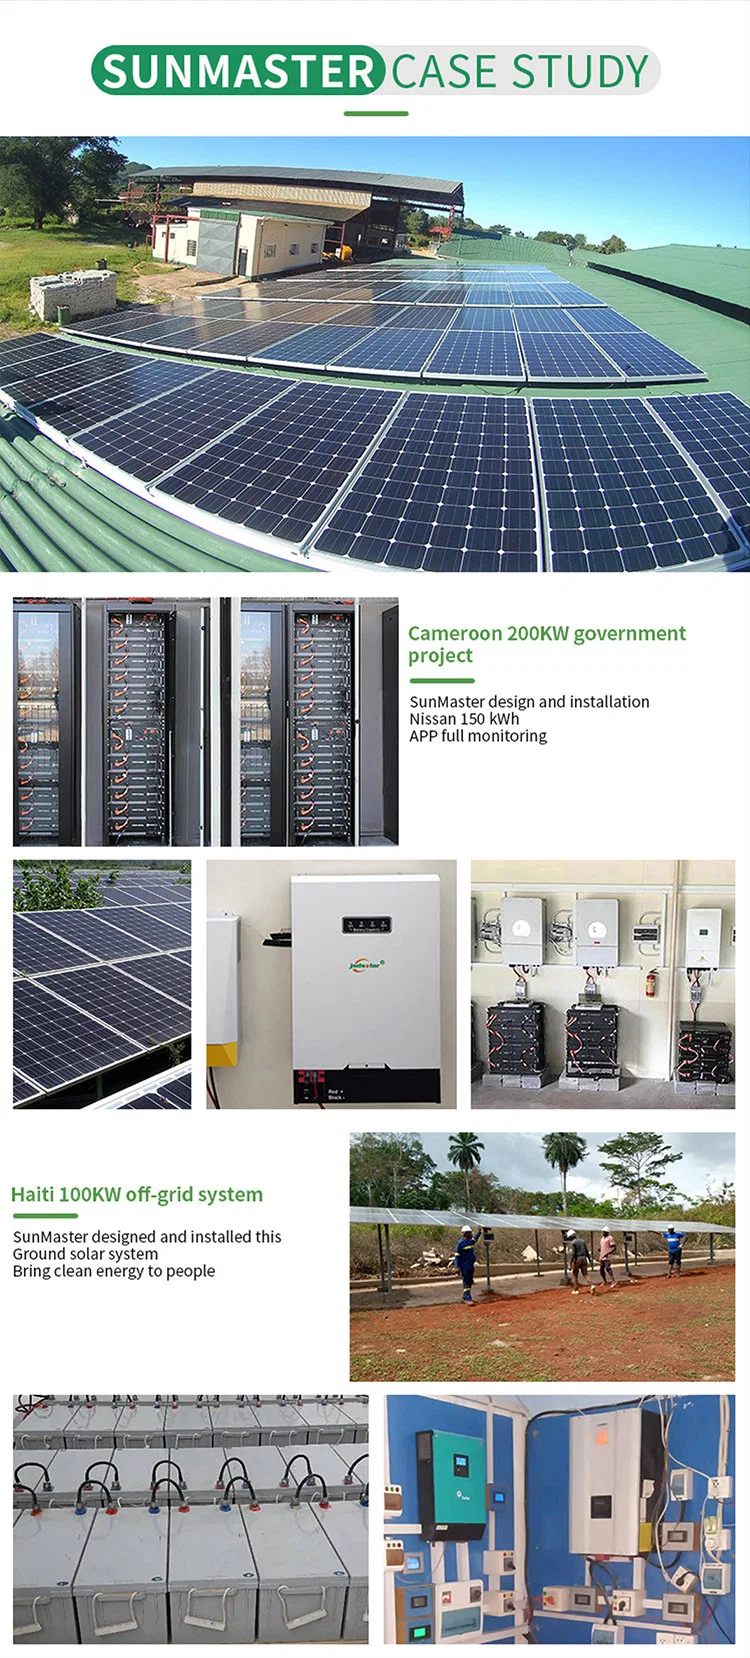 ODM Power Station 3000W Hybrid 10 Kv 2000 Kw 10kw Complete off Grid Energy 550W 12kw Solar Power System Home for Houses